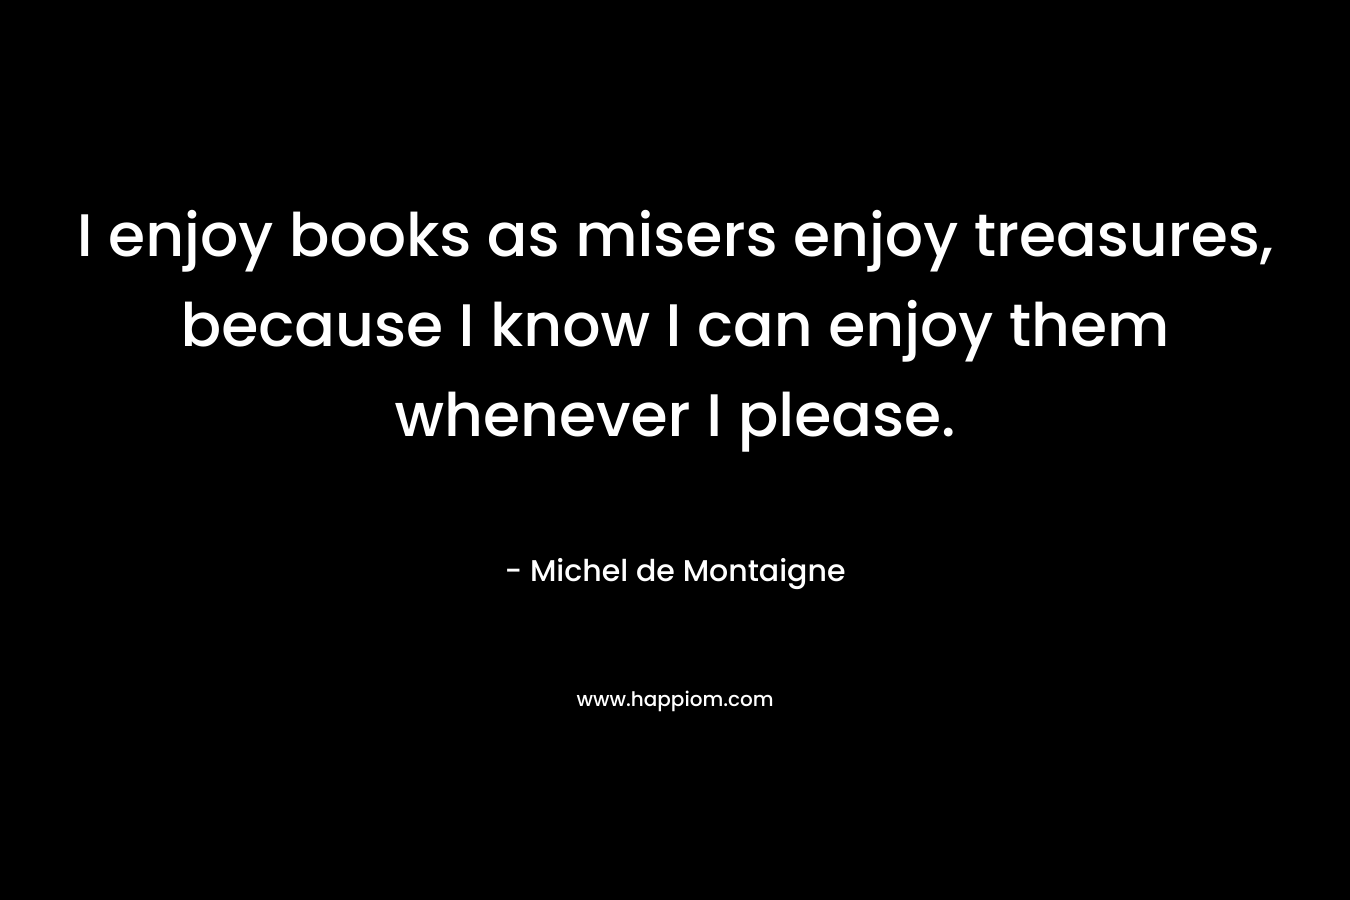 I enjoy books as misers enjoy treasures, because I know I can enjoy them whenever I please. – Michel de Montaigne